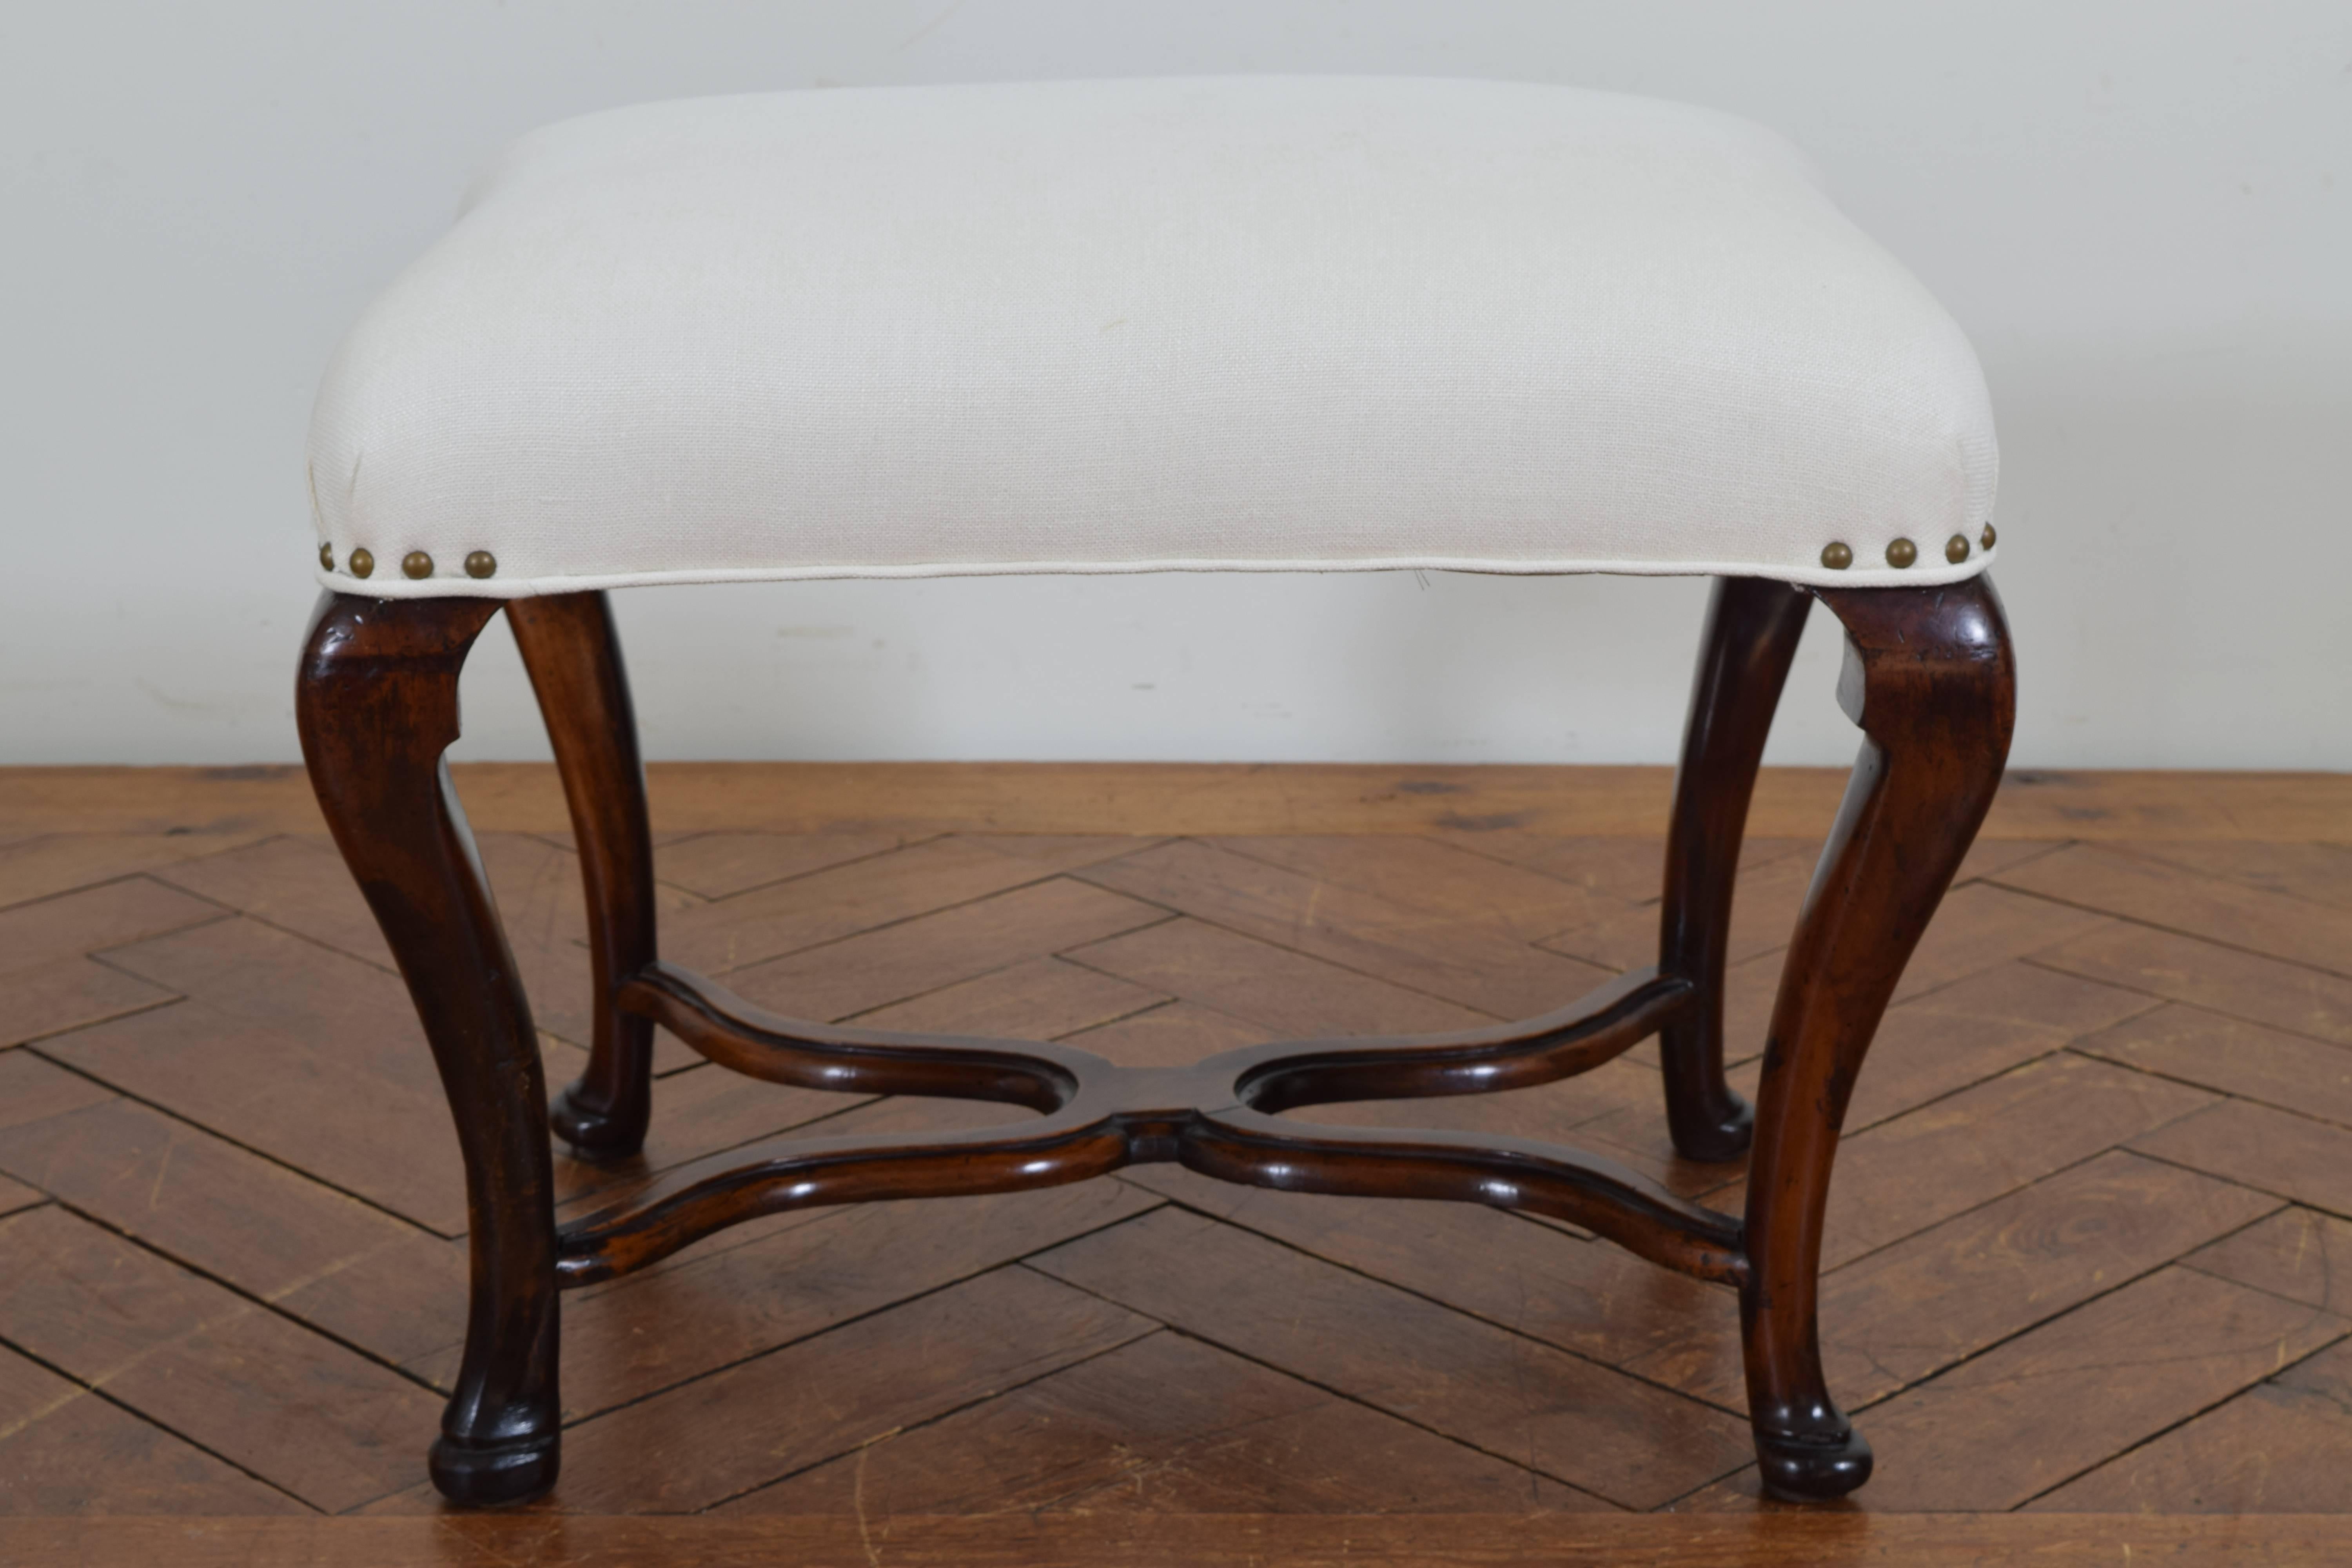 Having a shaped top upholstered in white linen and trimmed in nailheads, supported by cabriole legs joined by a shaped X-form stretcher, the legs ending in pad feet.